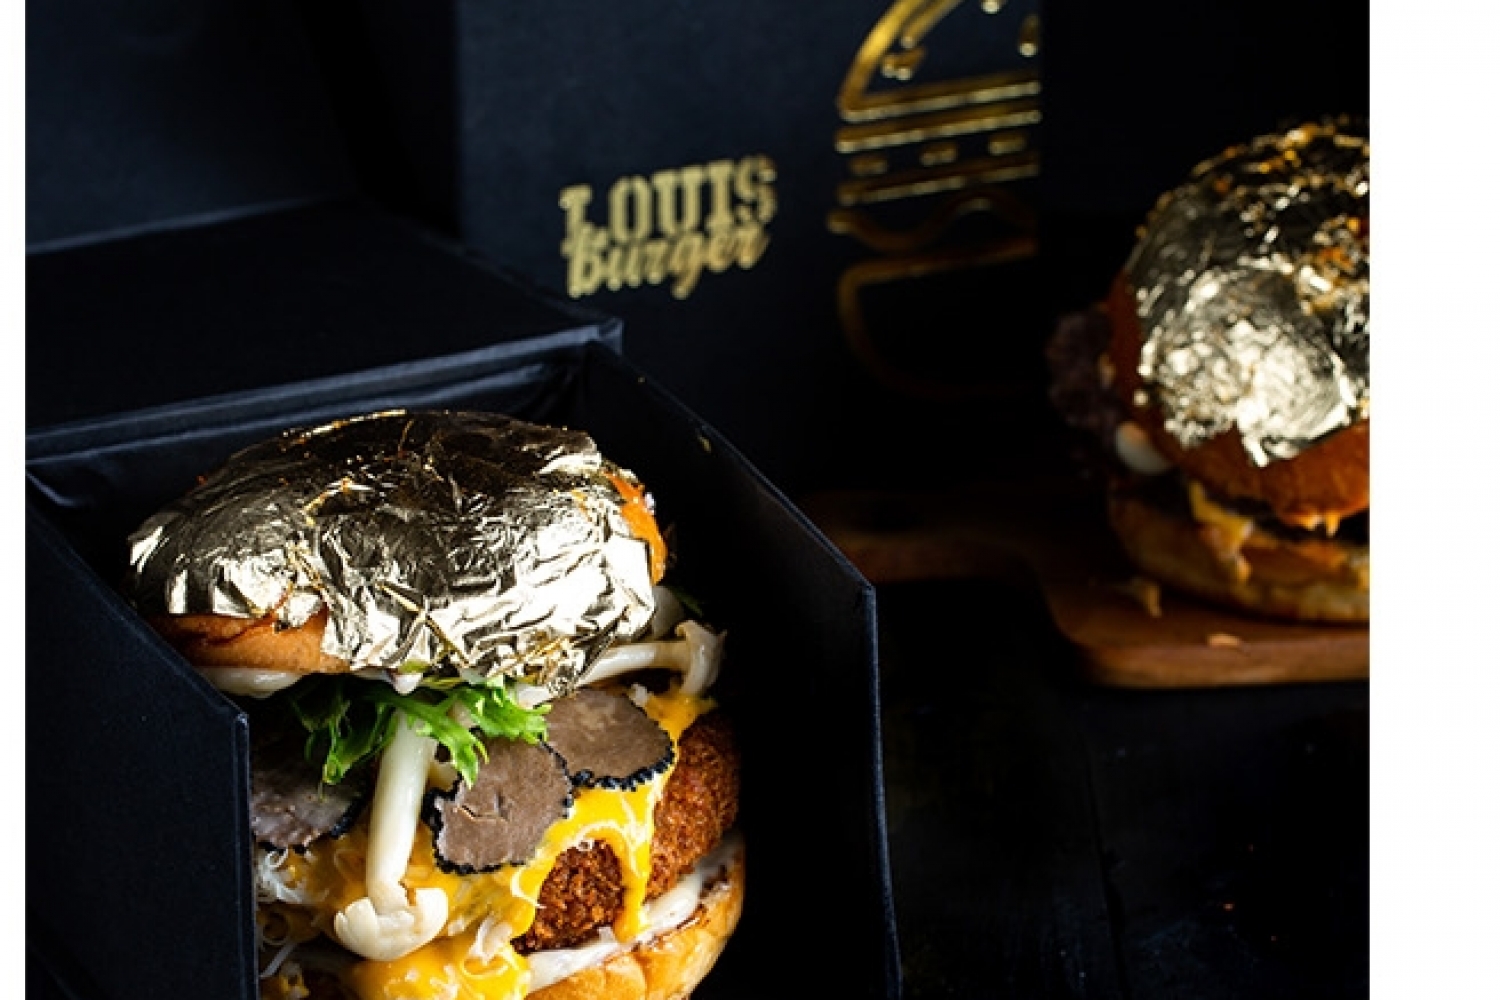 Louis Burger comes to town!